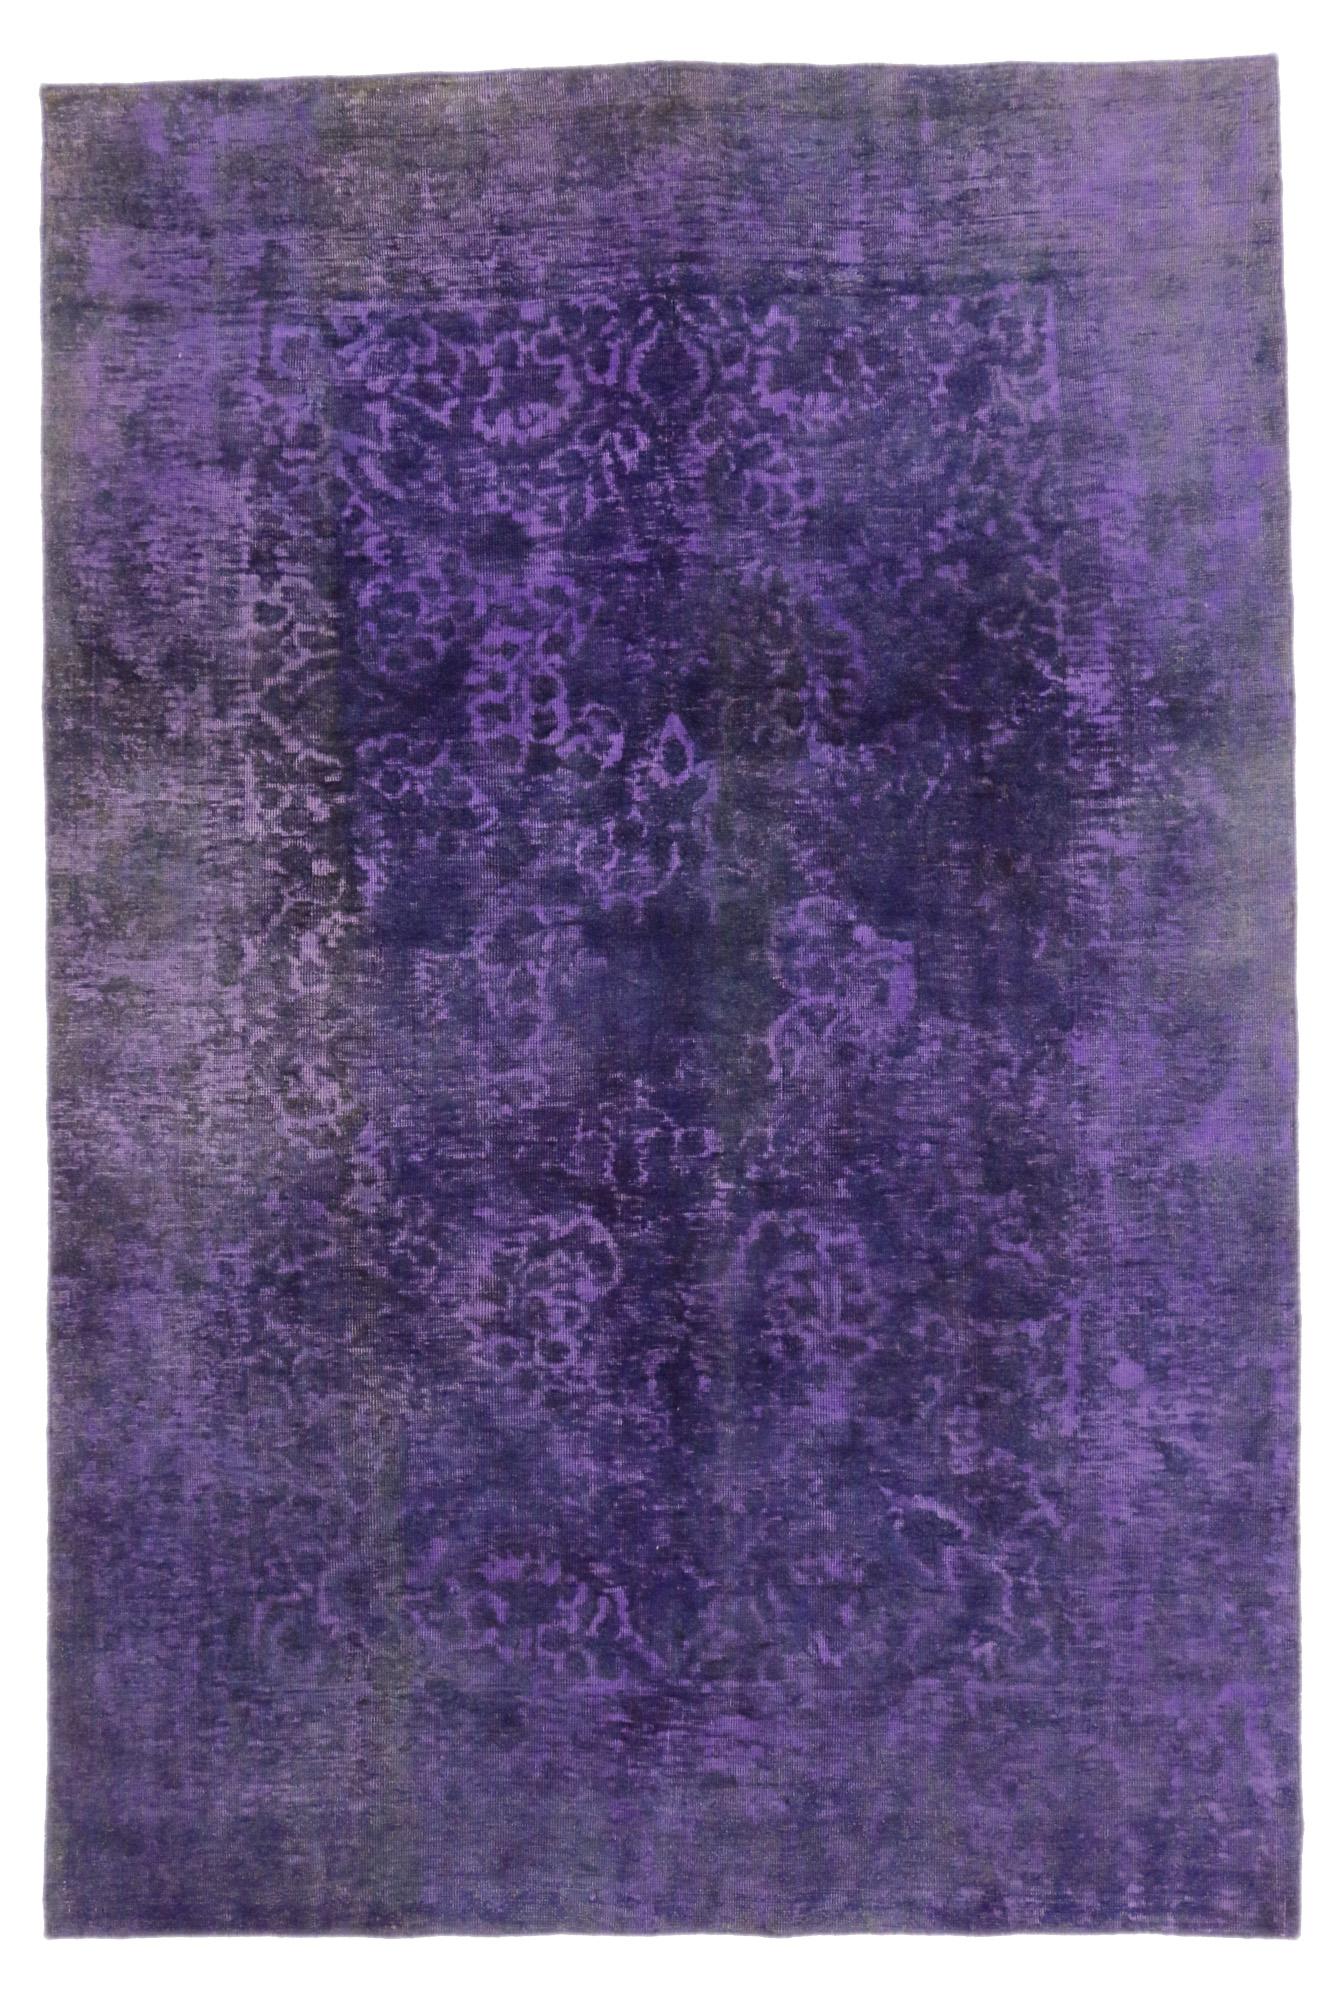 Vintage Turkish Purple Overdyed Rug, Bohemian Rhapsody Meets Maximalist Style For Sale 1